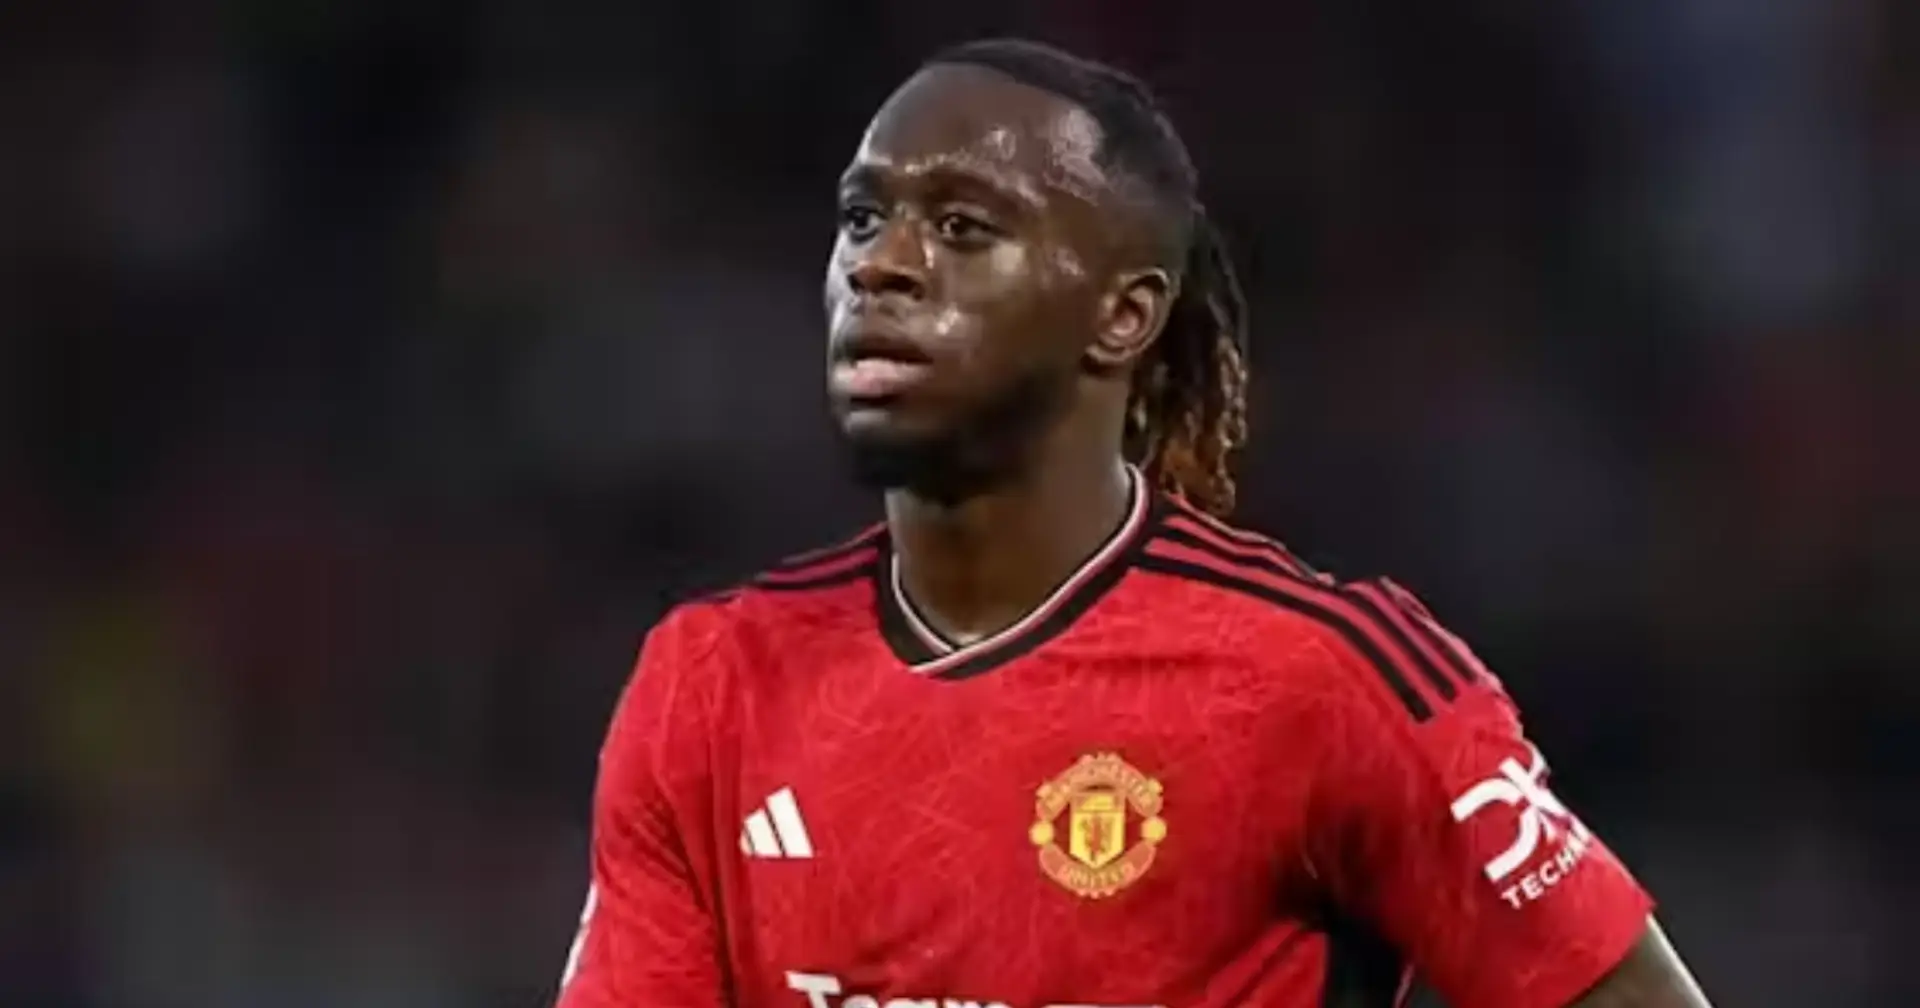 Man United confirm injury to Aaron Wan-Bissaka, he could be out for 2 months